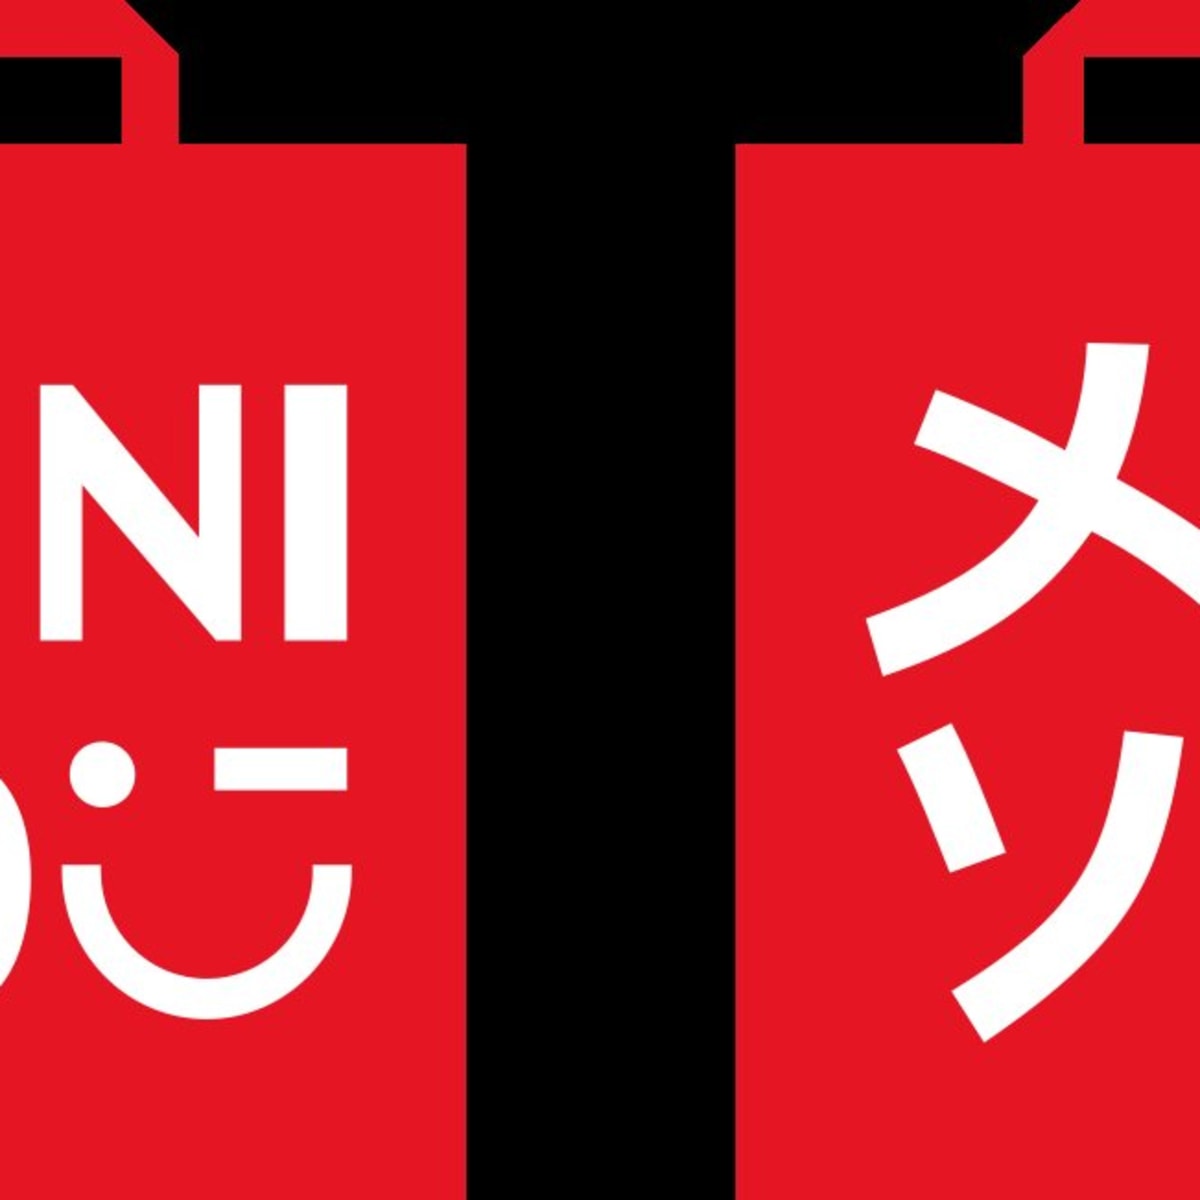 New Deal!] Spinoso Real Estate Group is pleased to announce Miniso